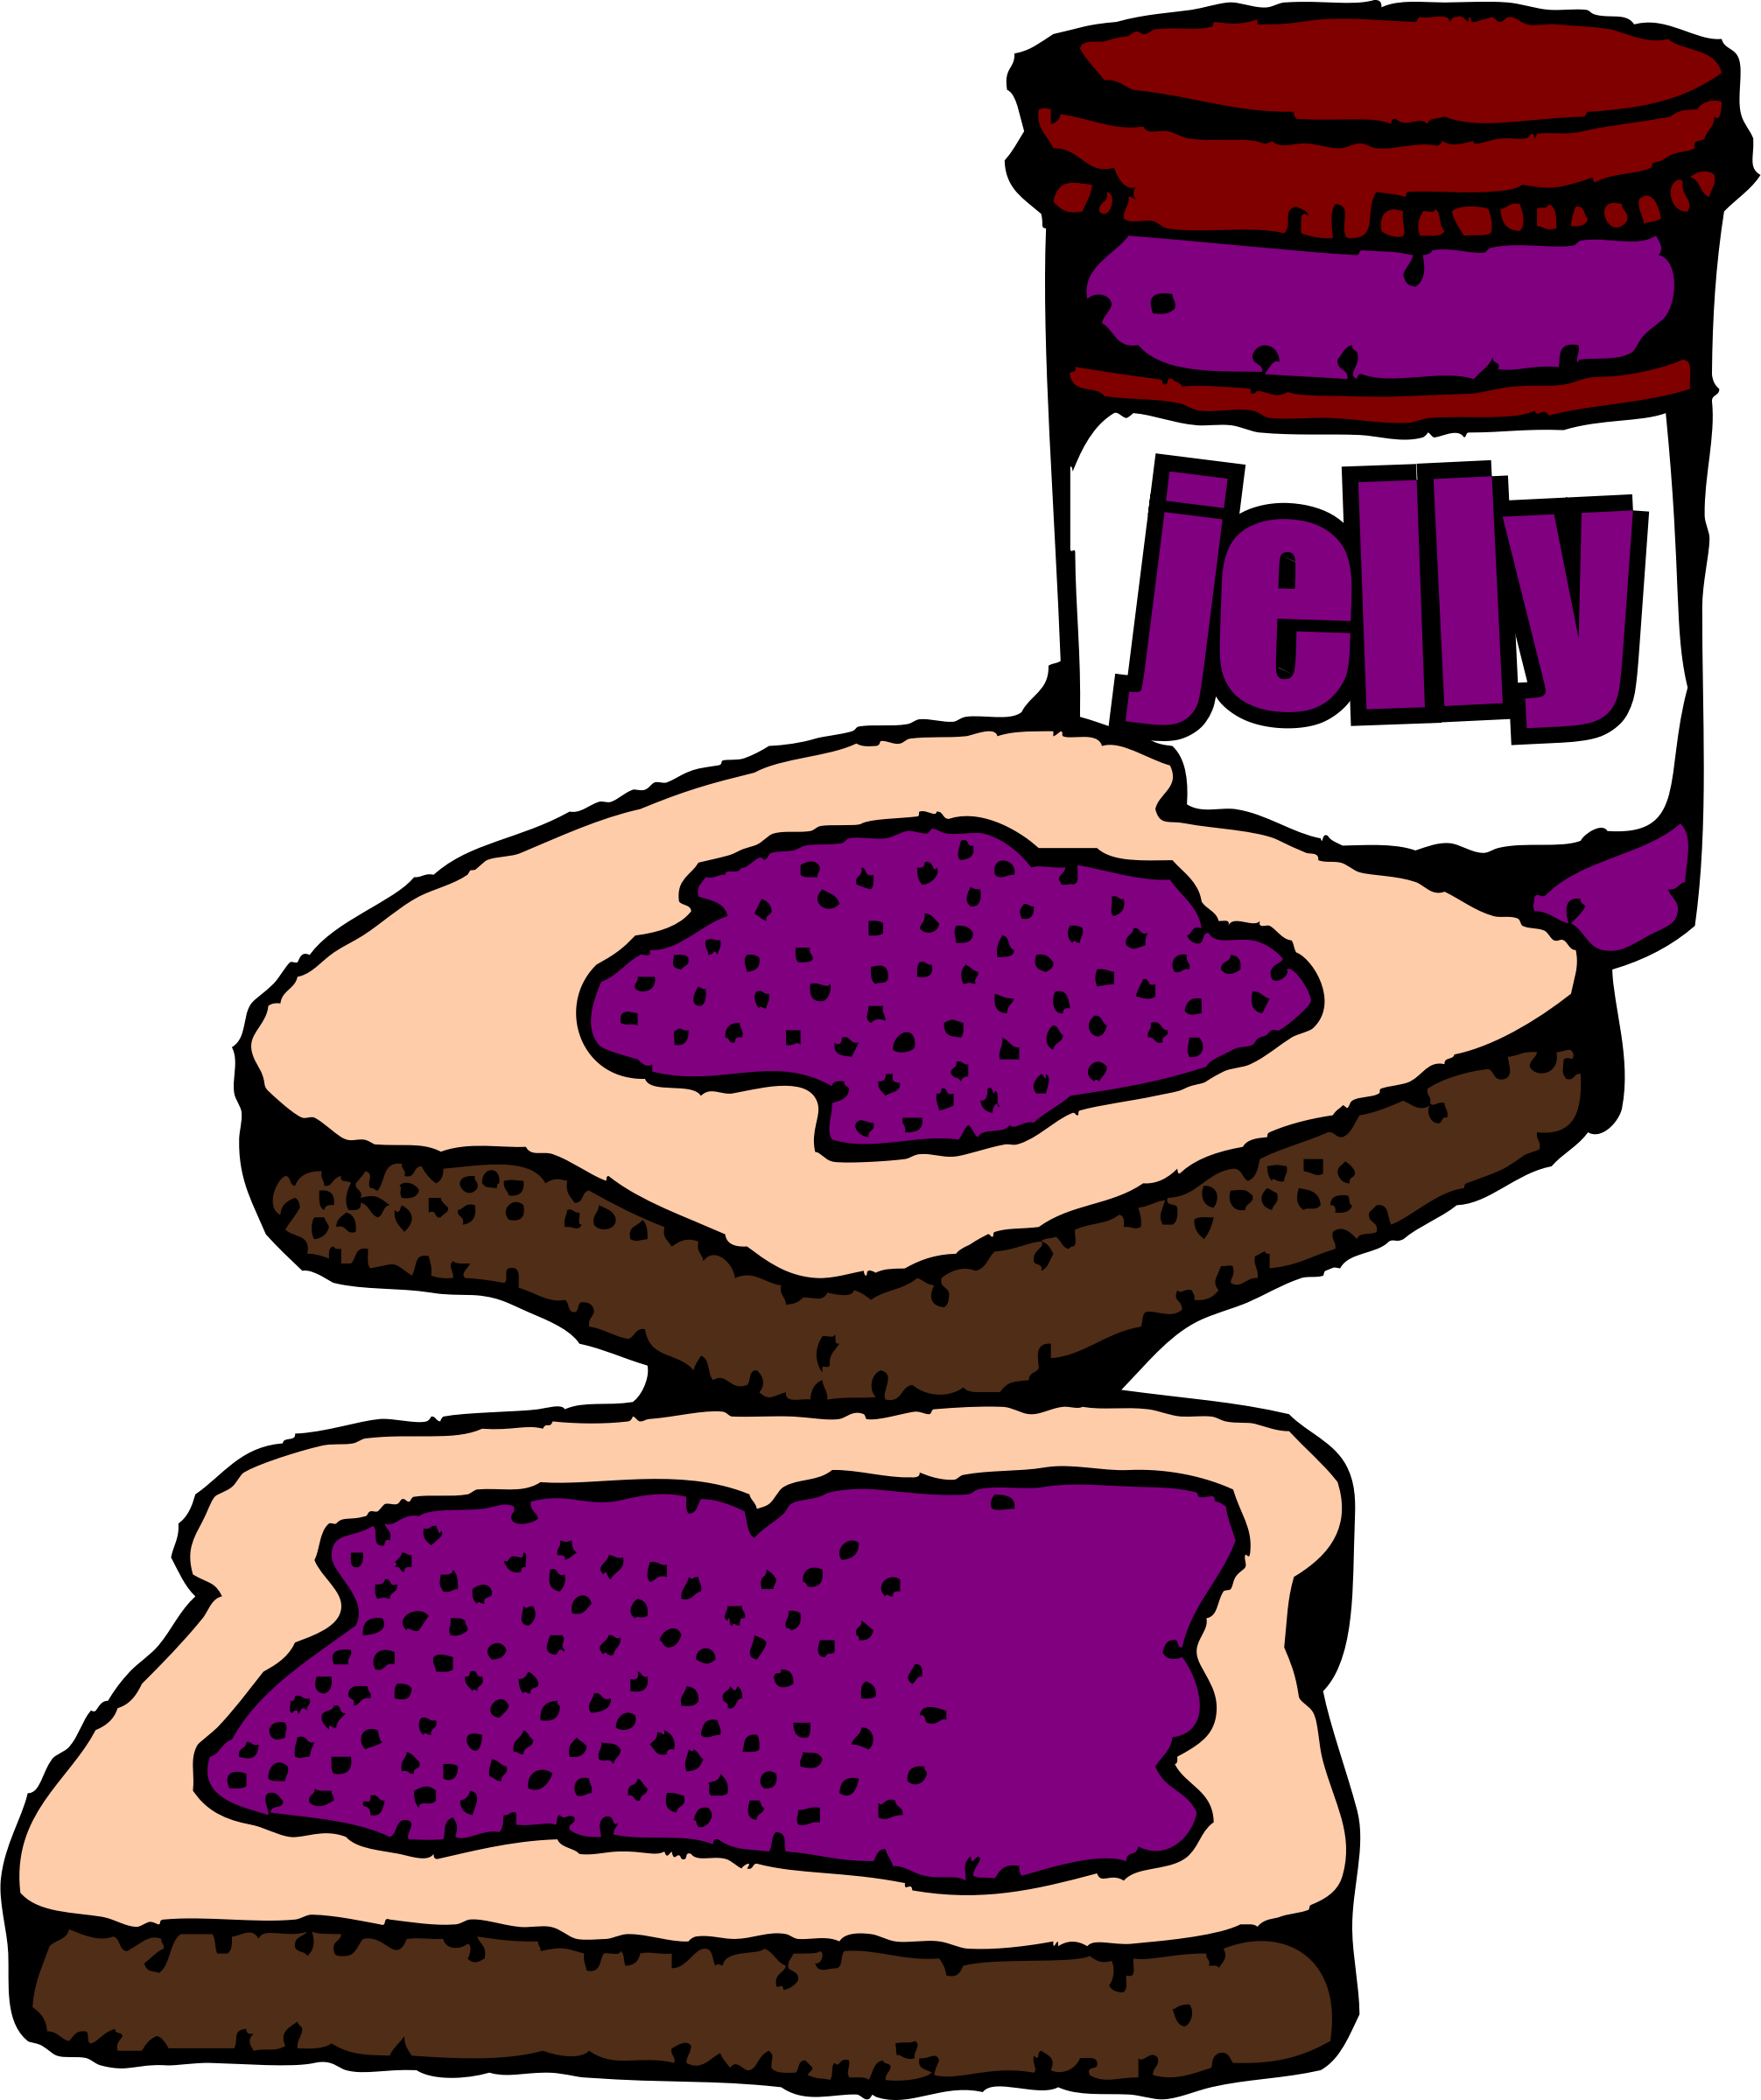 Images For  Peanut Butter And Jelly Sandwich Clip Art